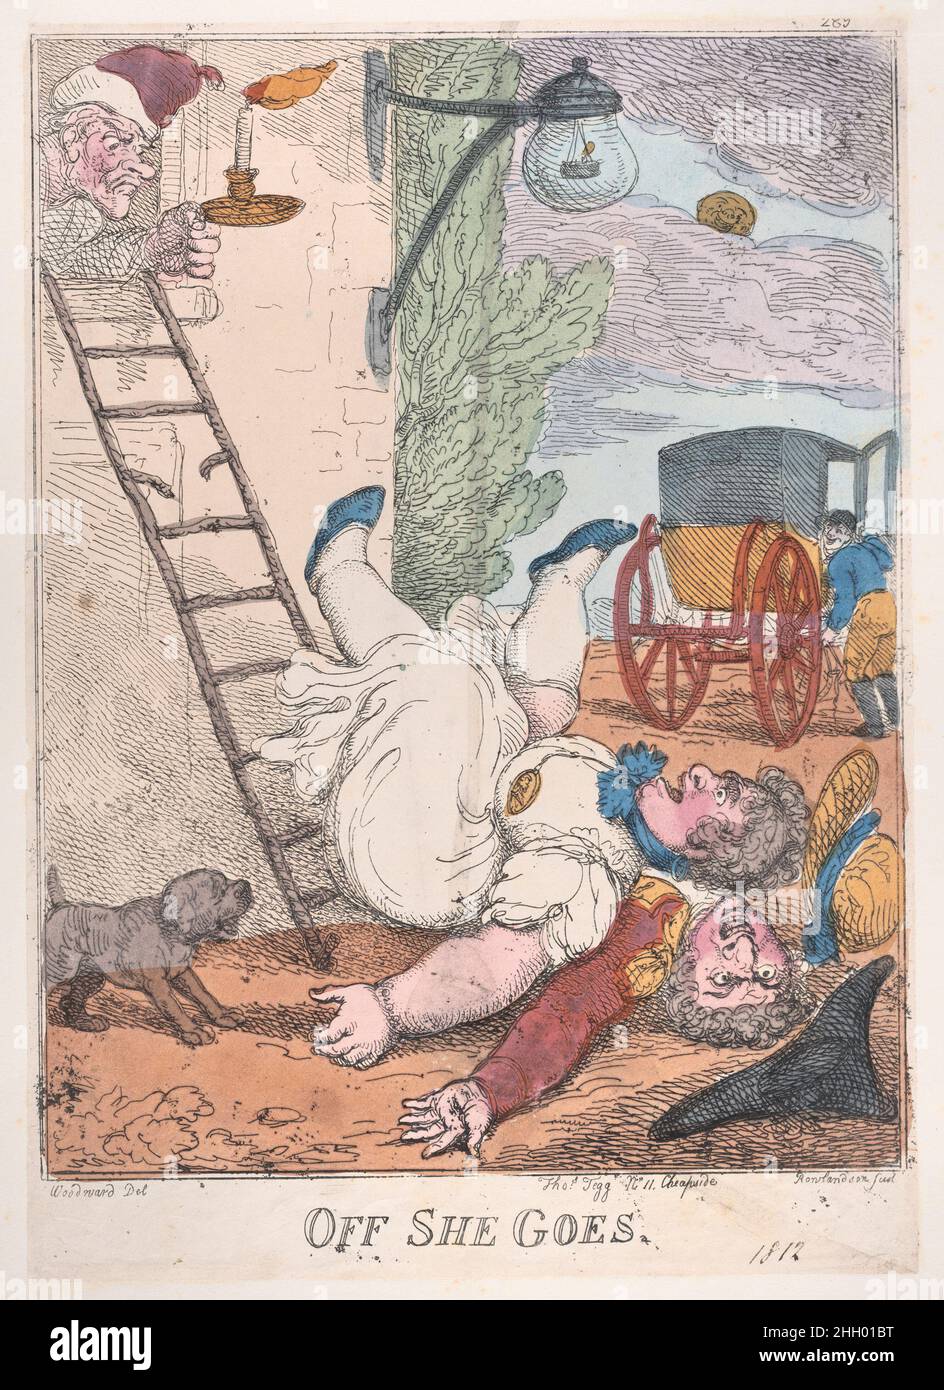 Off She Goes 1812 Thomas Rowlandson A portly woman falls from a ladder, knocking down her lover, who lies on his back beneath her. Both scream angrily, and a dog barks at them. The ladder leans against a window from which the unhappy husband looks out, holding a candle.. Off She Goes. Thomas Rowlandson (British, London 1757–1827 London). 1812. Hand-colored etching. Thomas Tegg (British, 1776–1846). Prints Stock Photo